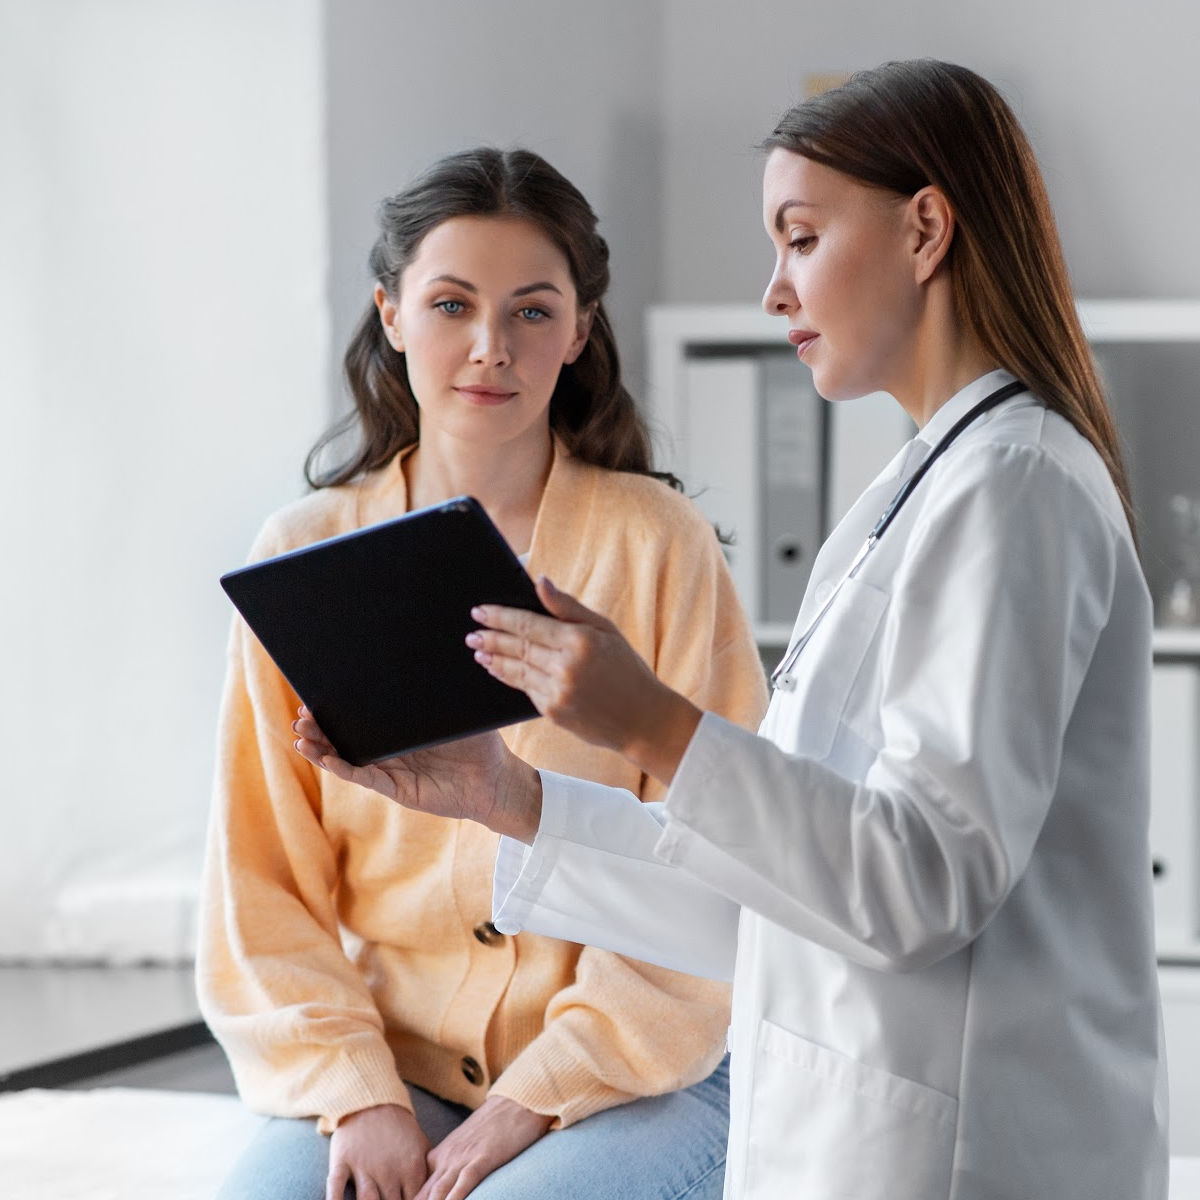 The Essential Checklist for Choosing the Right Urgent Care Facility 